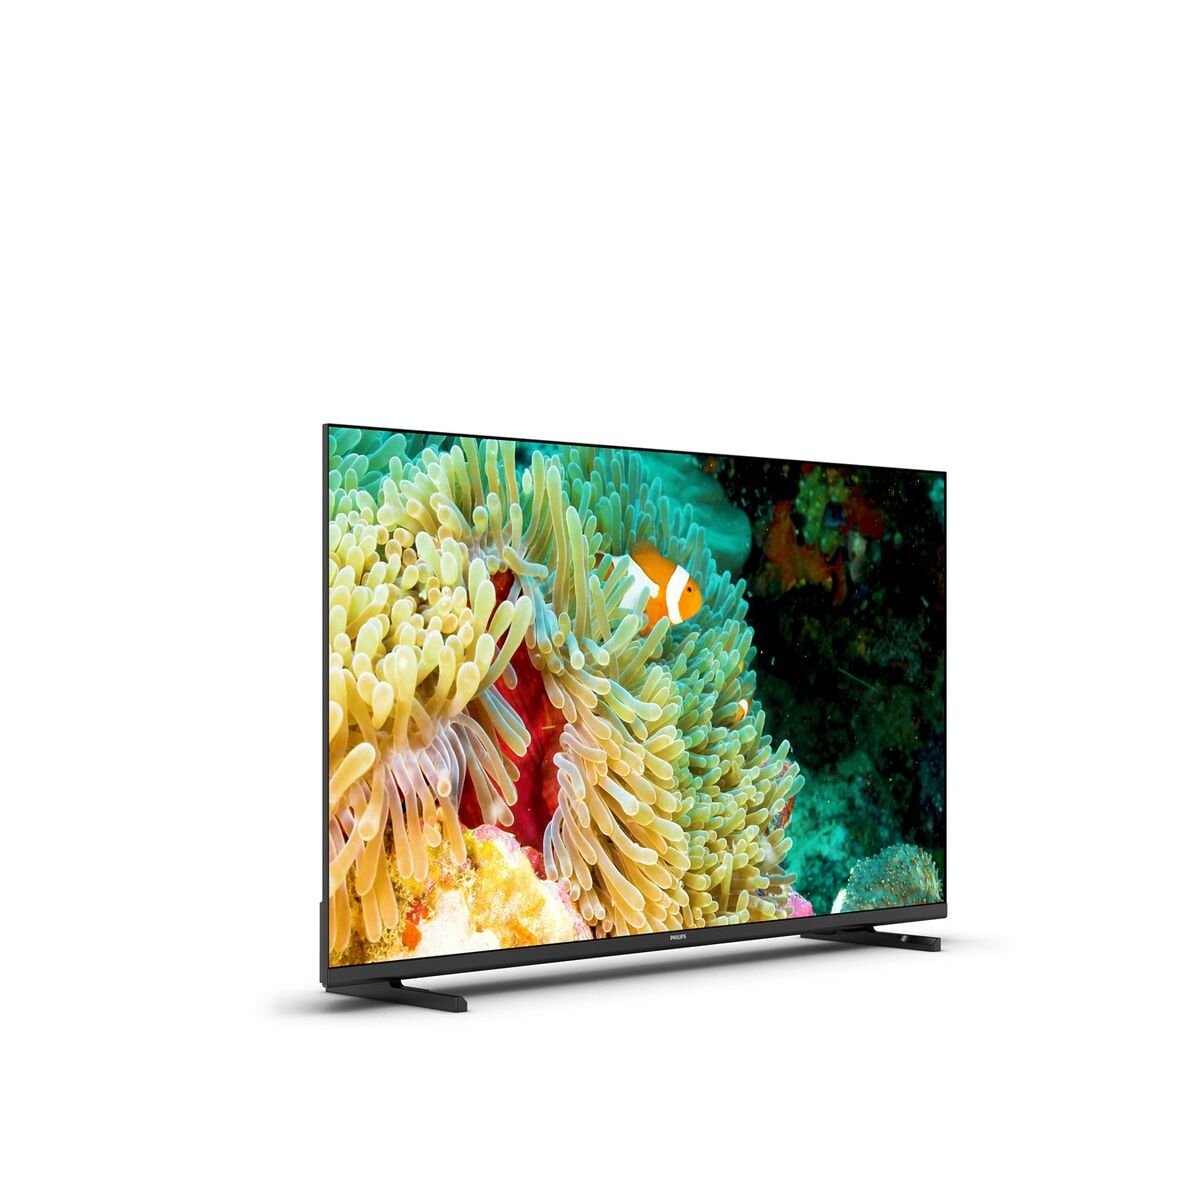 Smart TV Philips 50PUS7607/12 50" 4K Ultra HD LED HDR HDR10